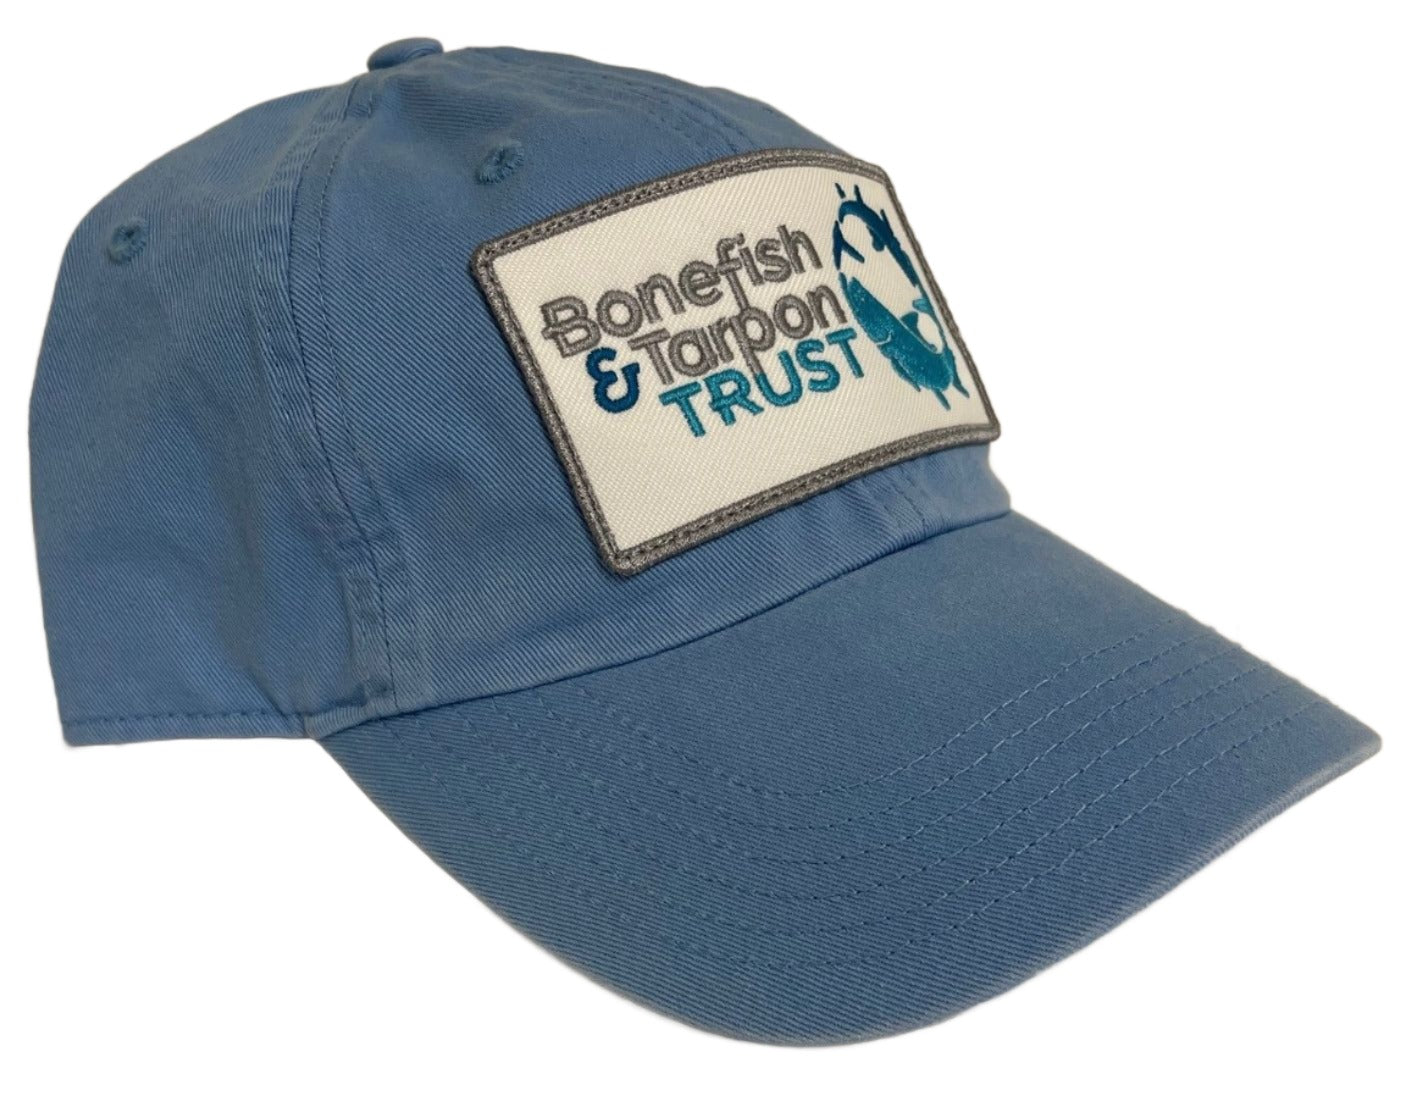 BTT Washed Patch Cap - Columbia Blue